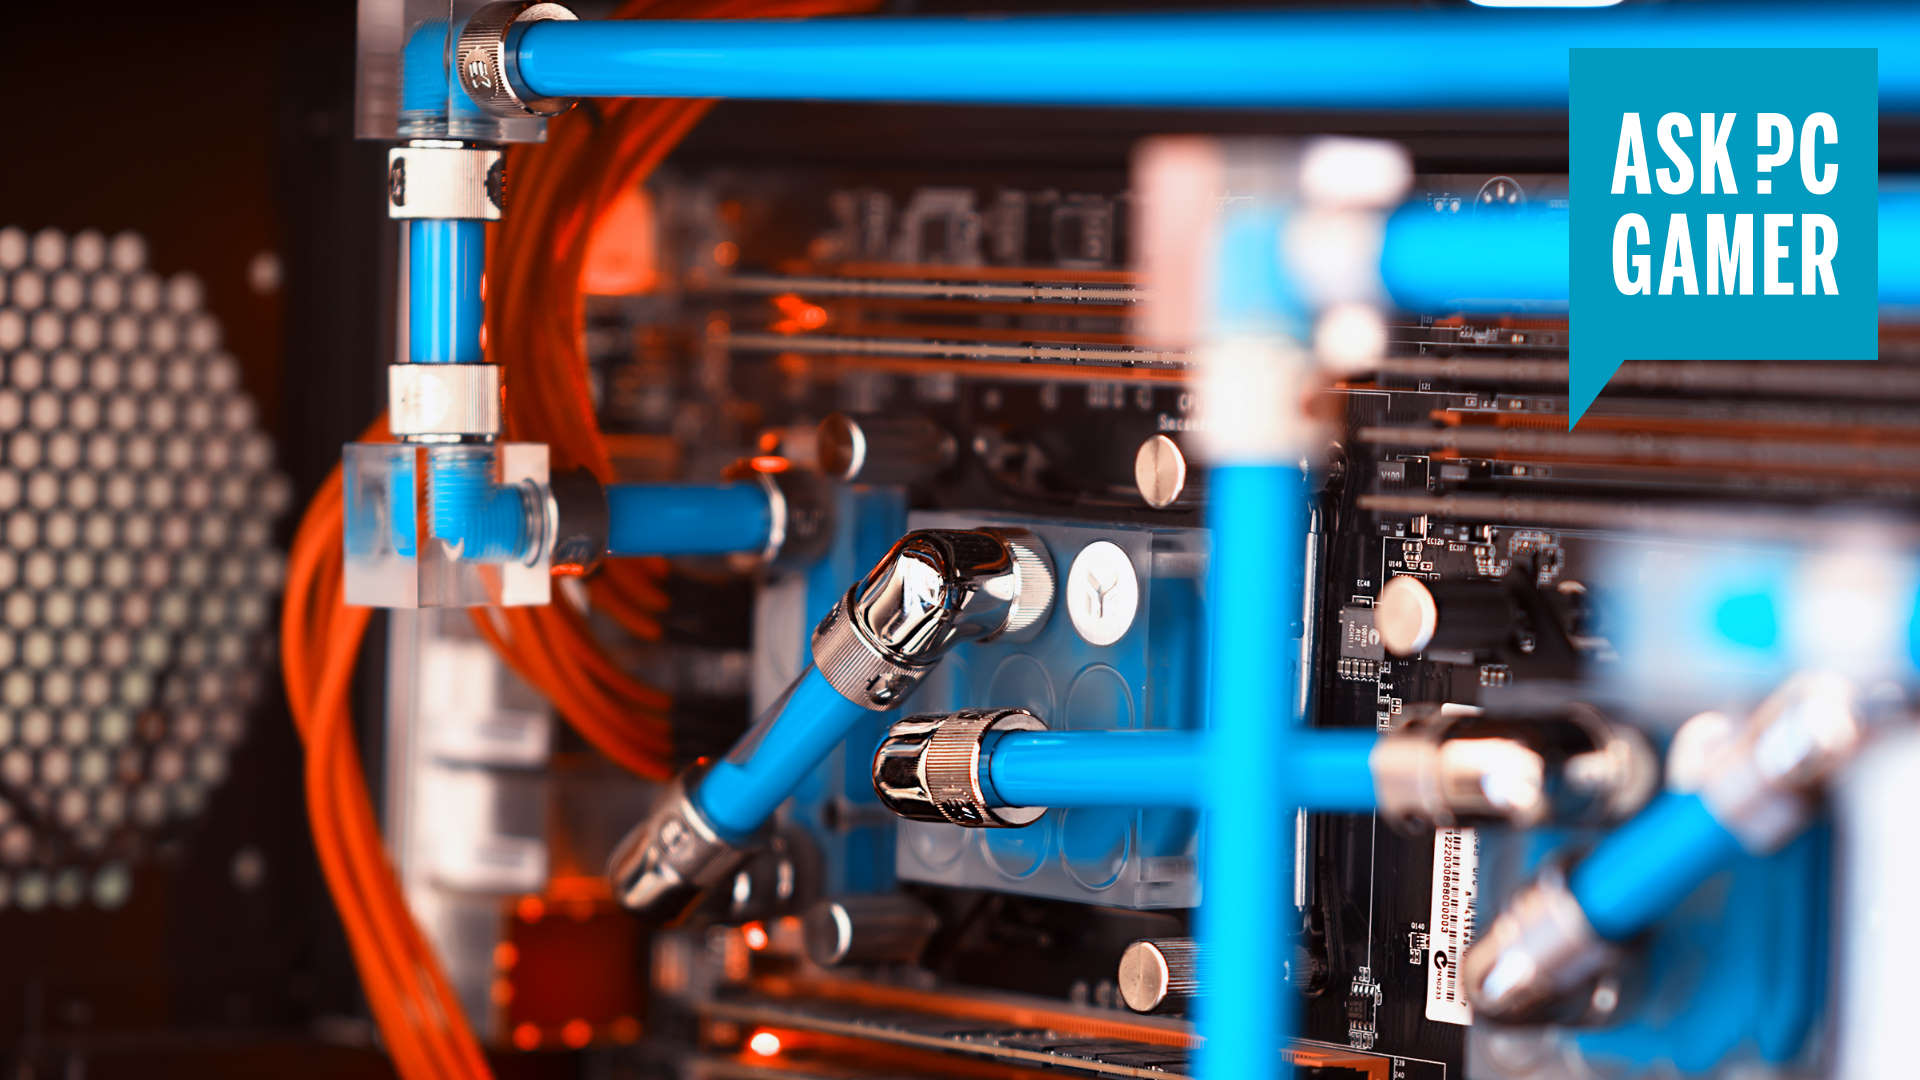 What is Liquid Cooling?